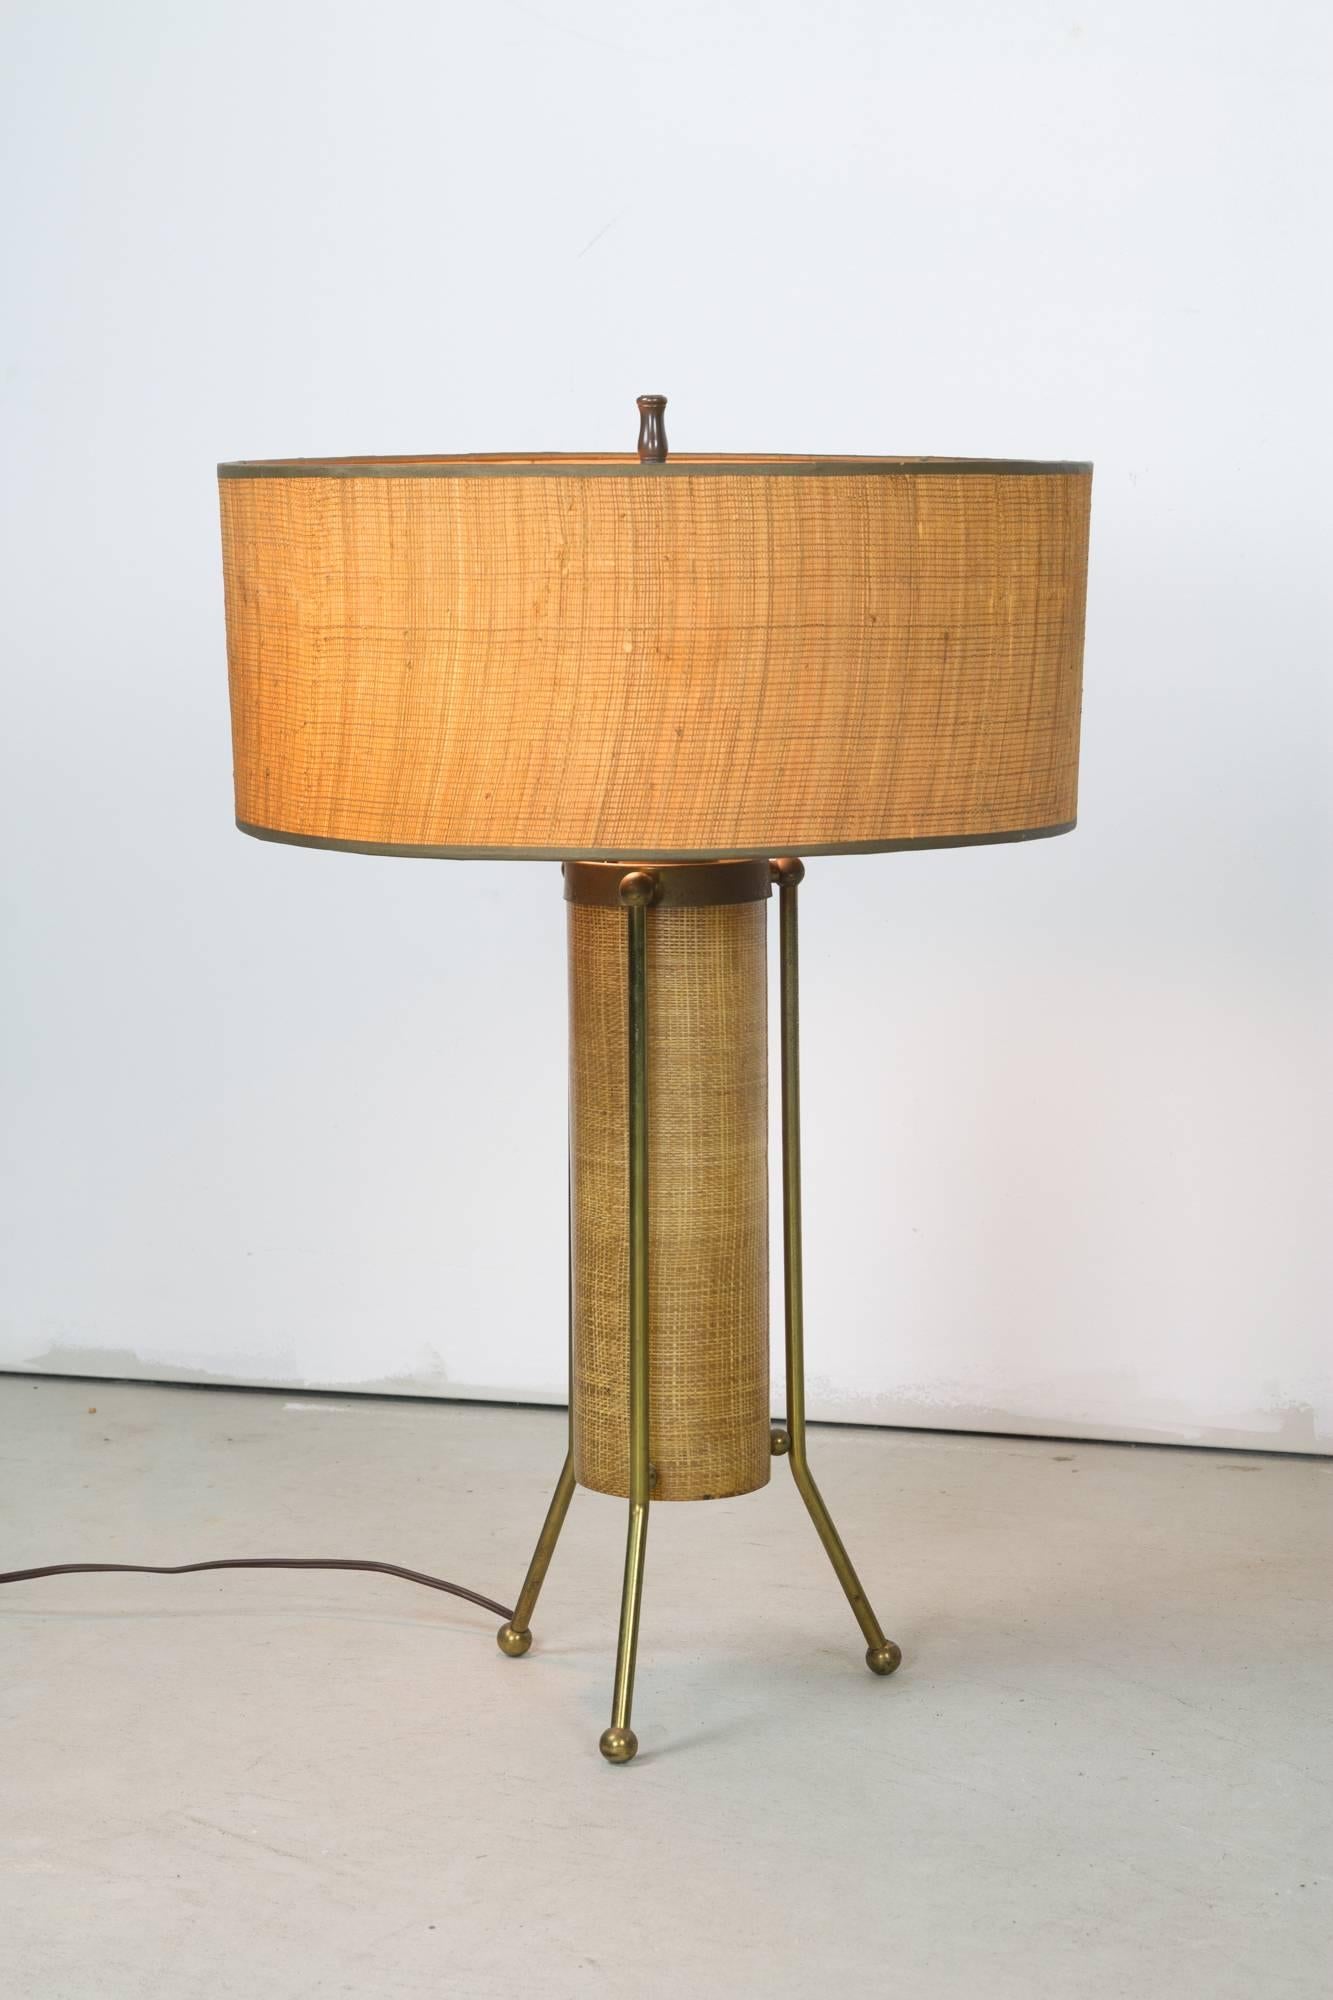 An atomic table lamp featuring a reed shade with stitched fiberglass diffuser and cylindrical fiberglass body-shade producing downlight, supported by an outer brass rod frame and three legged base on ball feet. Light can be cast from the main shade